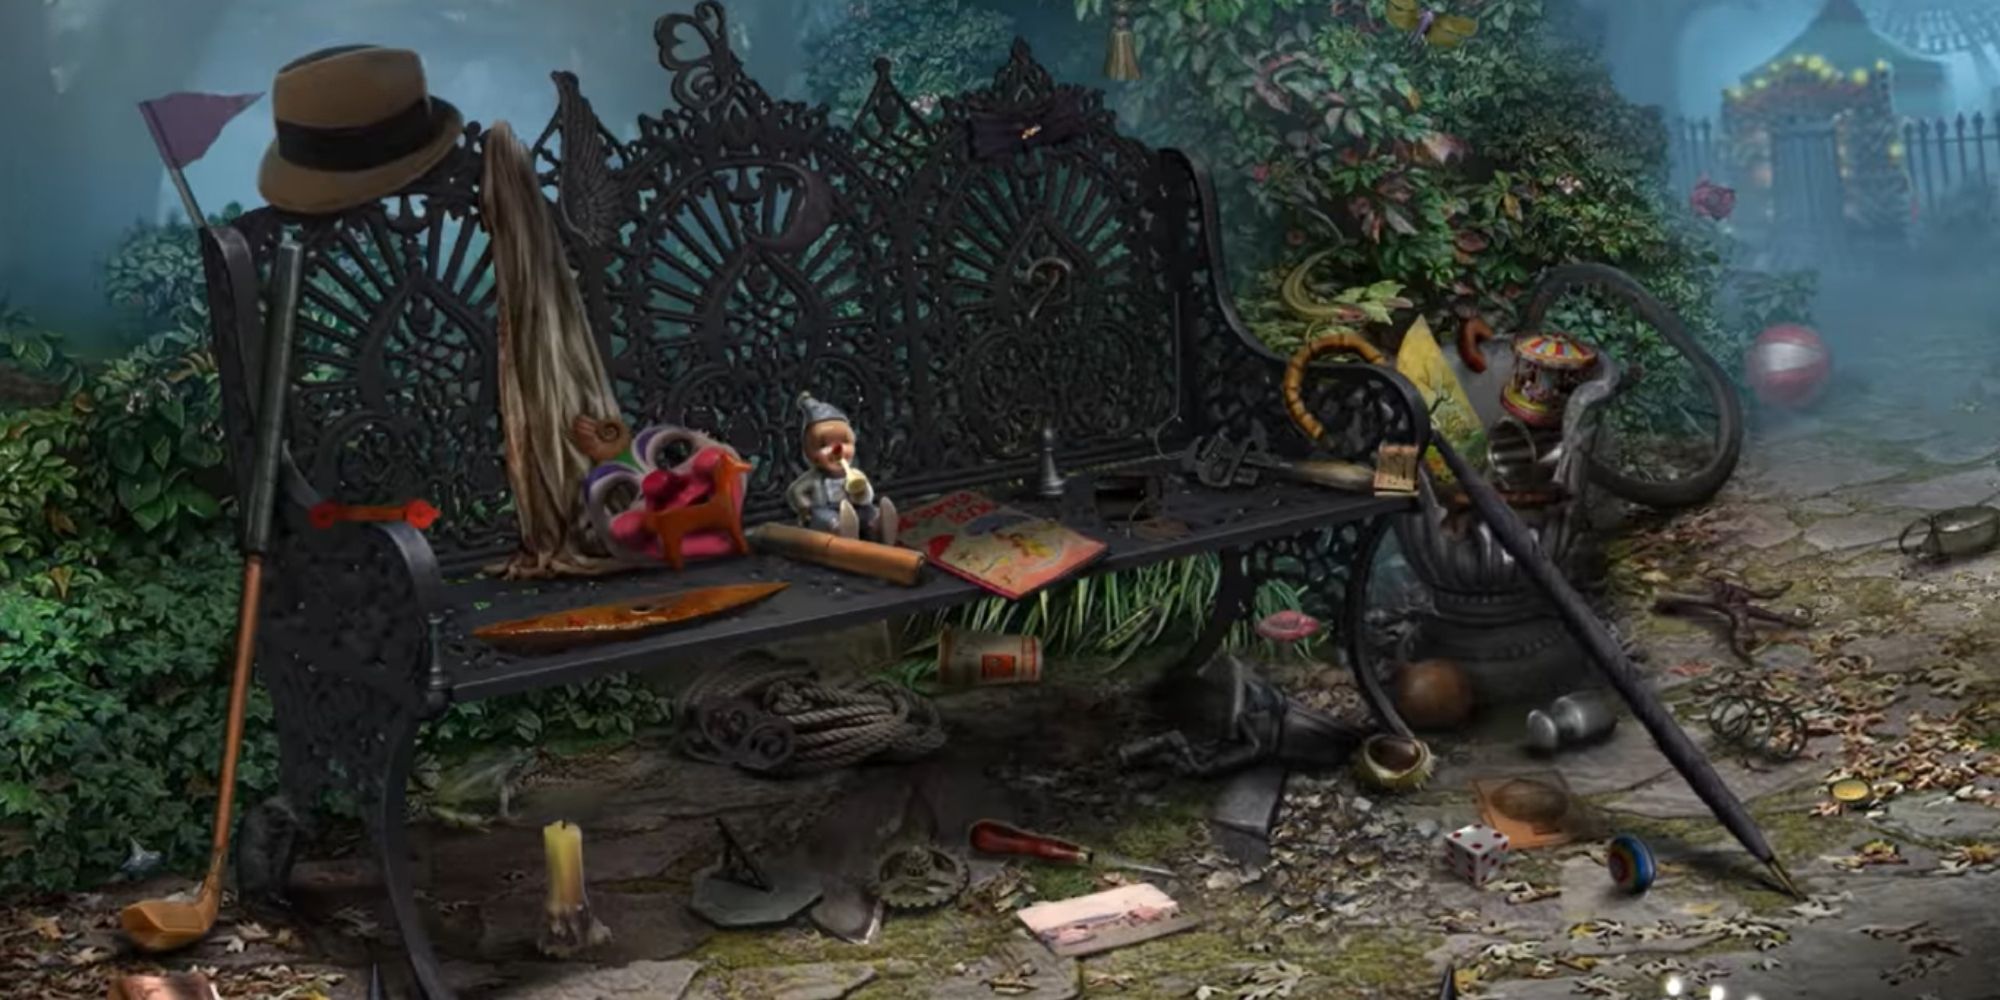 A bench covered in junk, including clown dolls and masks